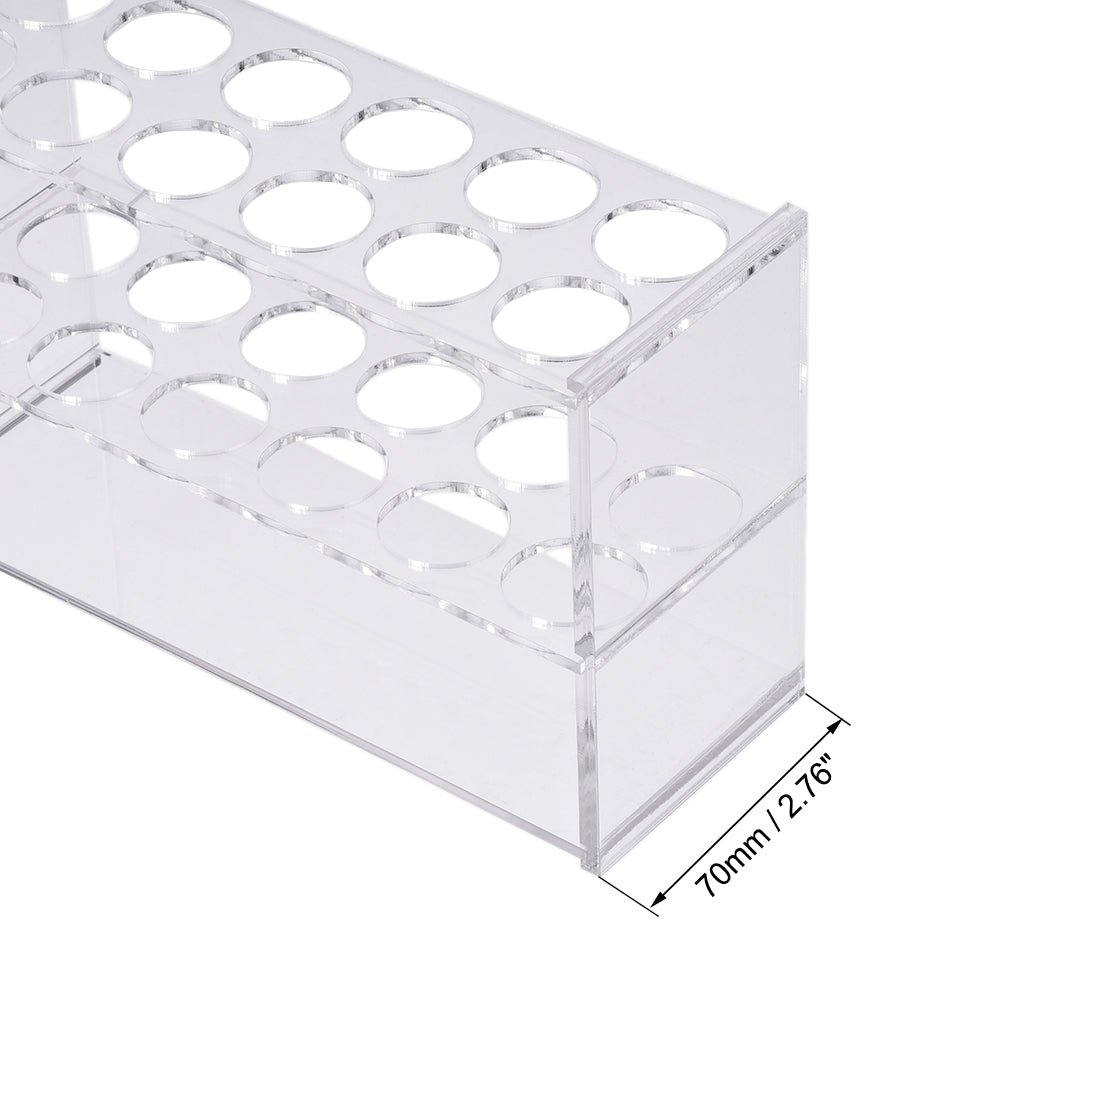 uxcell Uxcell Acrylic Test Tube Holder Rack 2x6 Wells for Centrifuge Tubes Clear